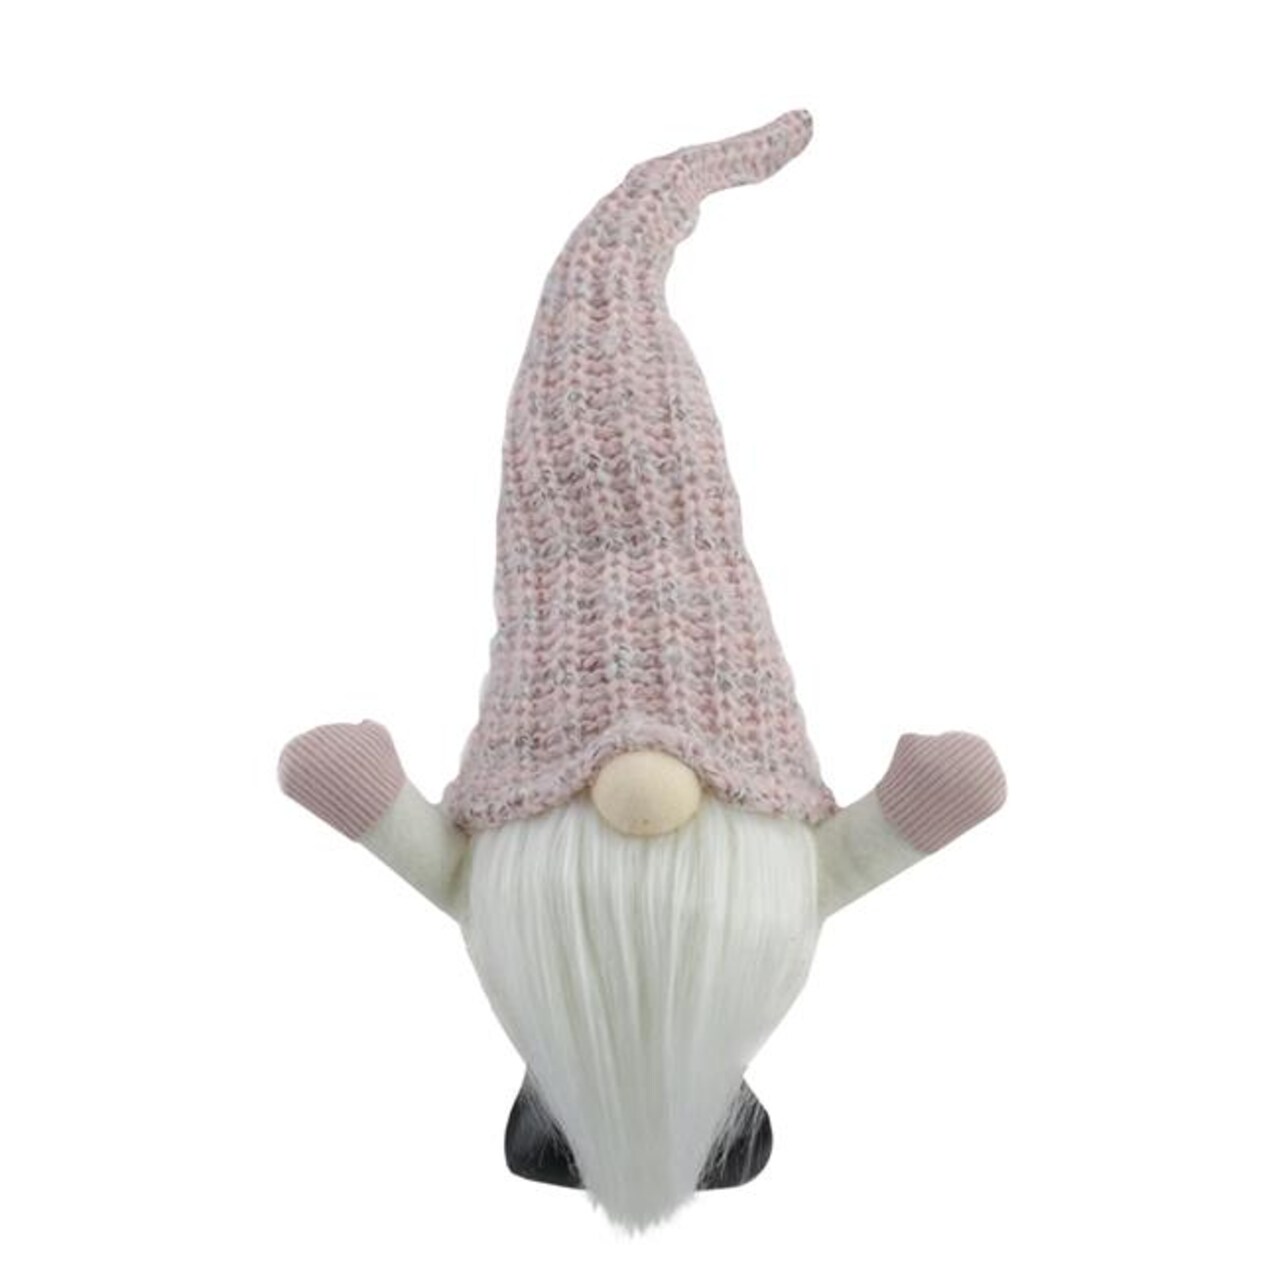 NorthLight 34313208 14 in. LED Lighted Rattan Round Christmas Gnome Figure, Pink